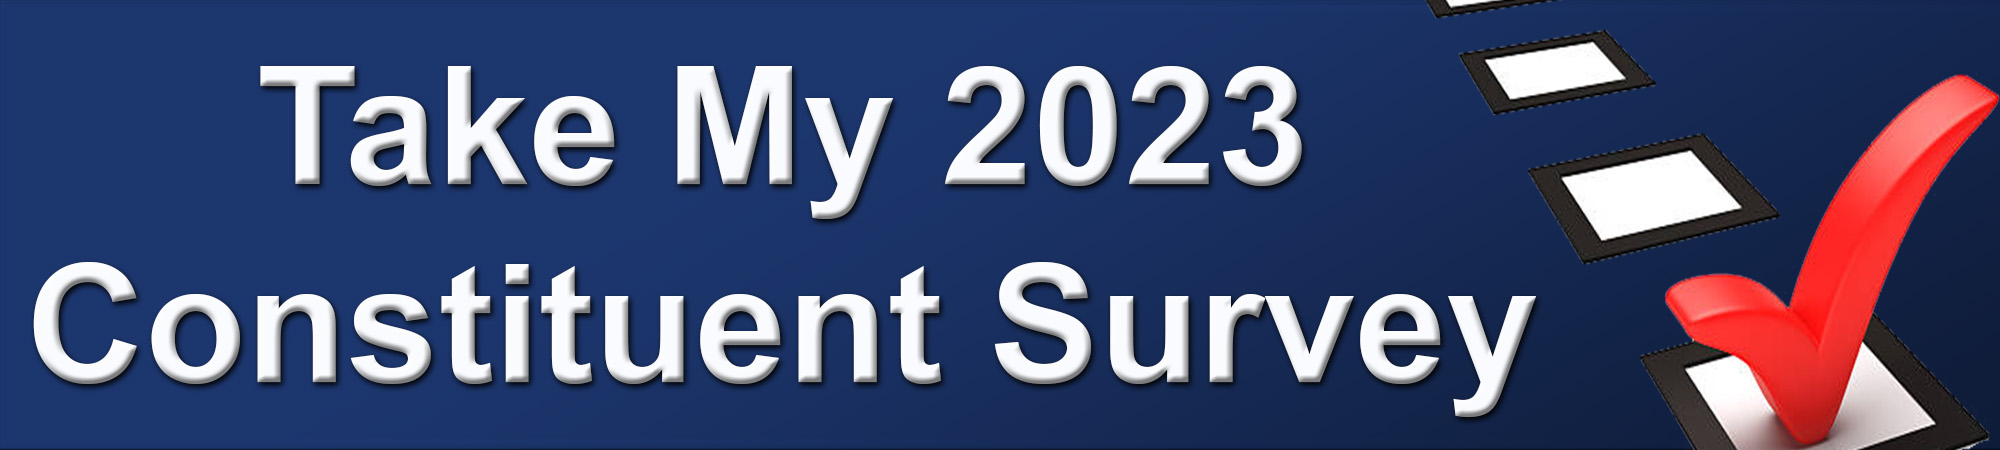 Take my 2022 Constituent Survey